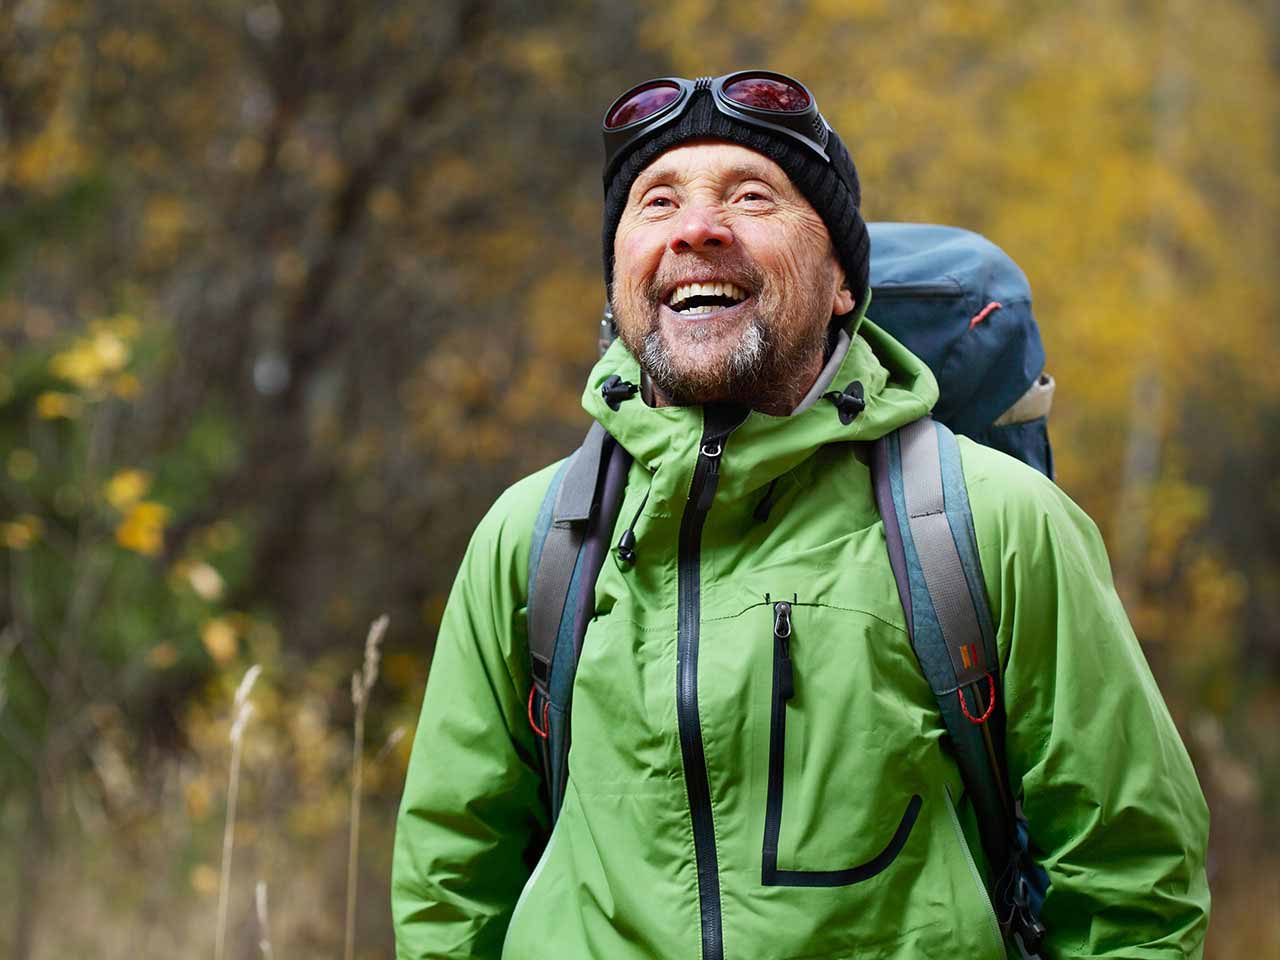 Mature man hiking with backpack and laughing